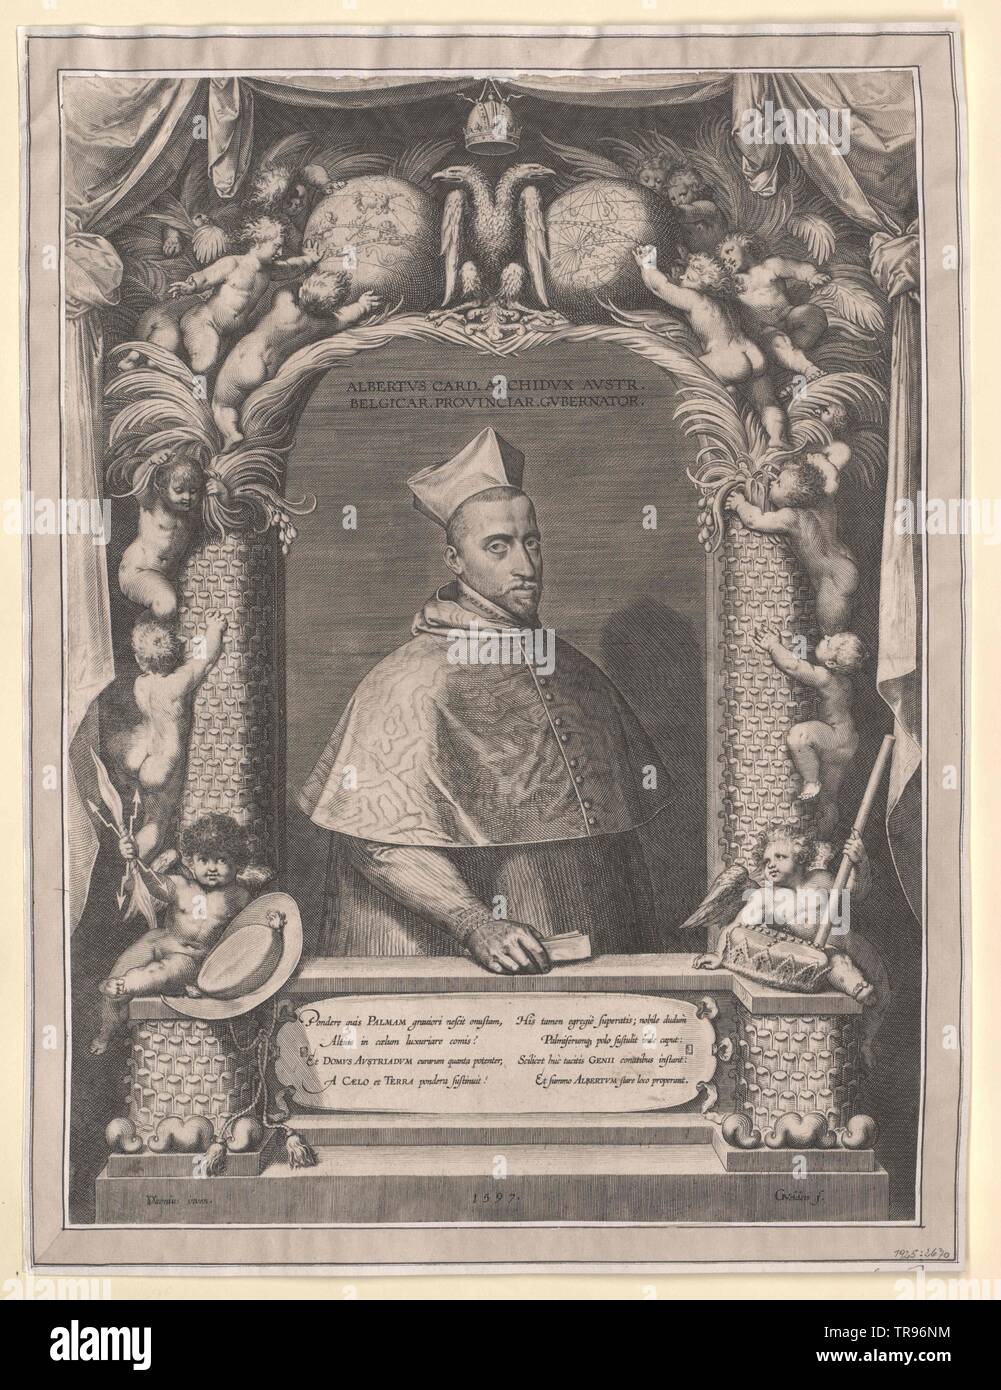 Albrecht VII the pious, Archduke of Austria, cardinal, 1577 archbishop of Toledo and Primas of Spain, renounce 1598, proconsul of the Netherlands, Additional-Rights-Clearance-Info-Not-Available Stock Photo